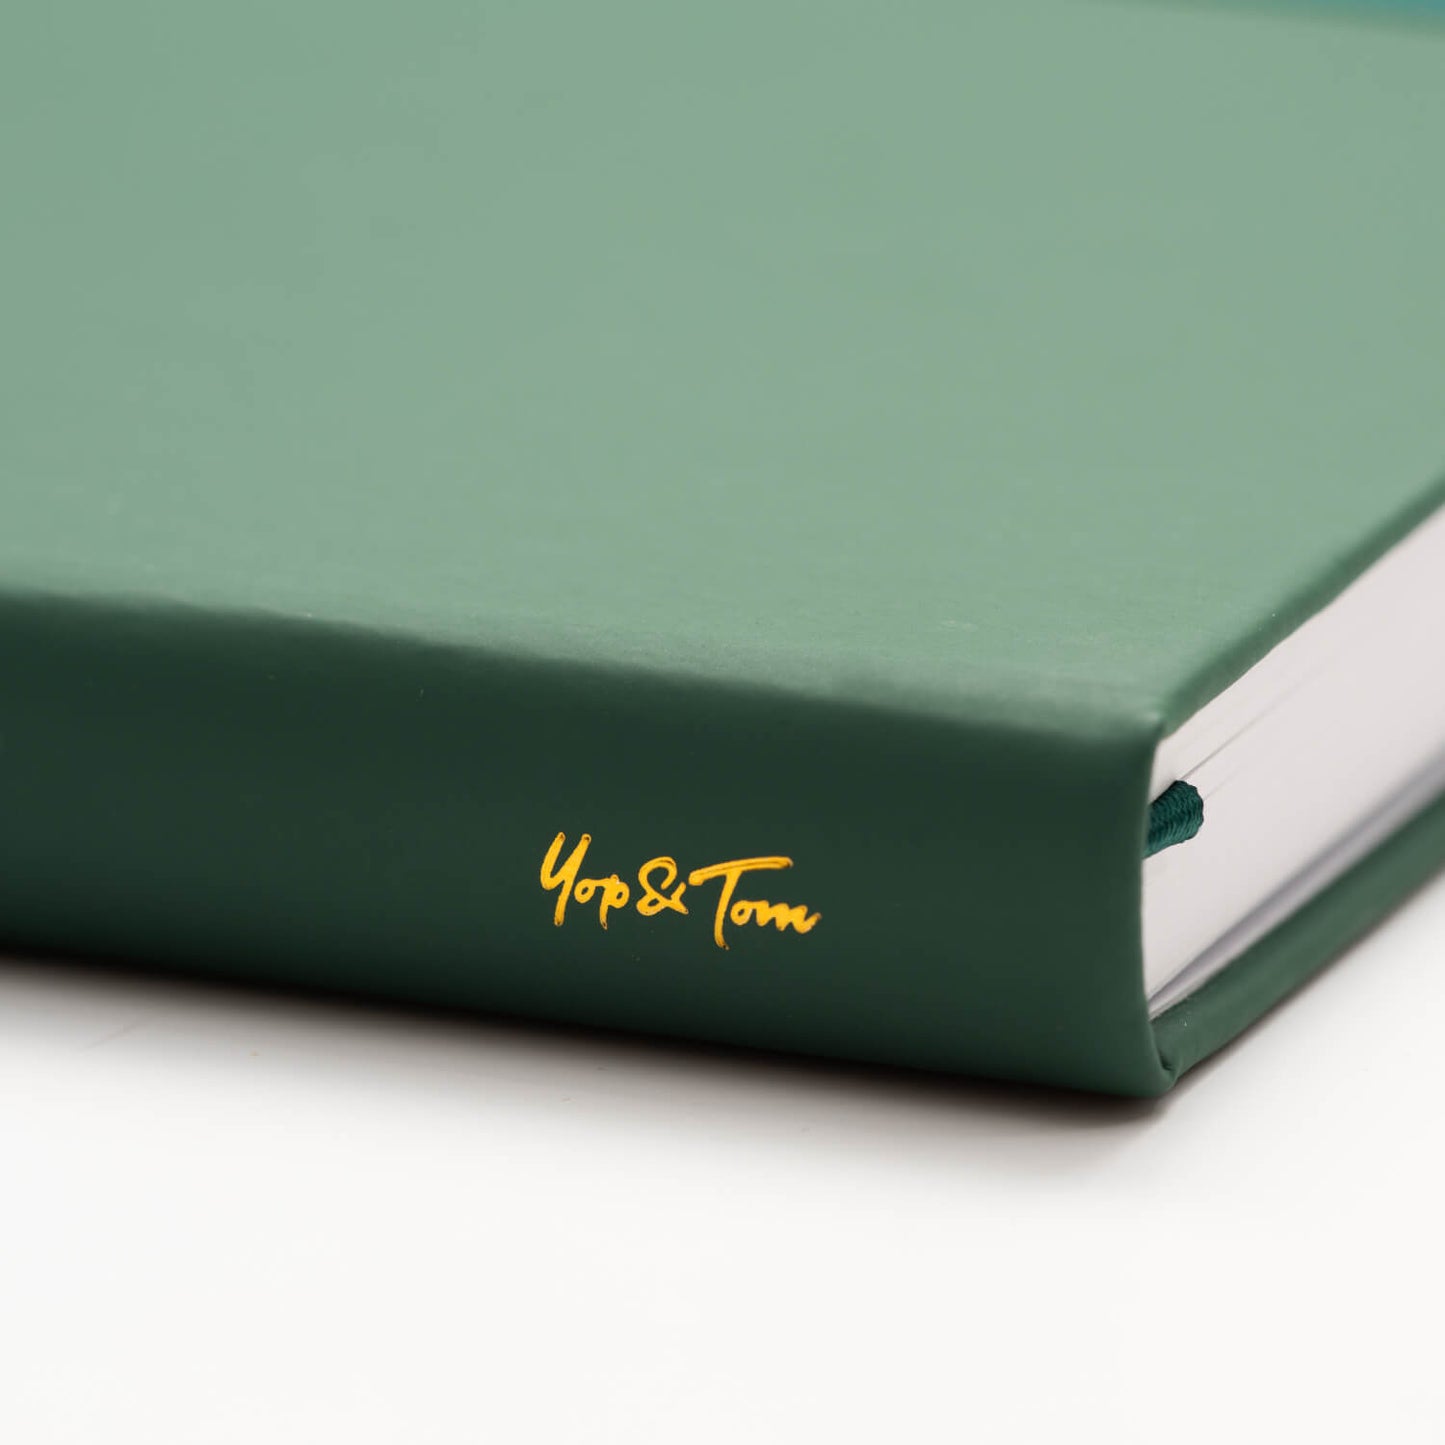 lined journal a5 - forest green - zoom in on Yop & Tom gold debossed logo on spine